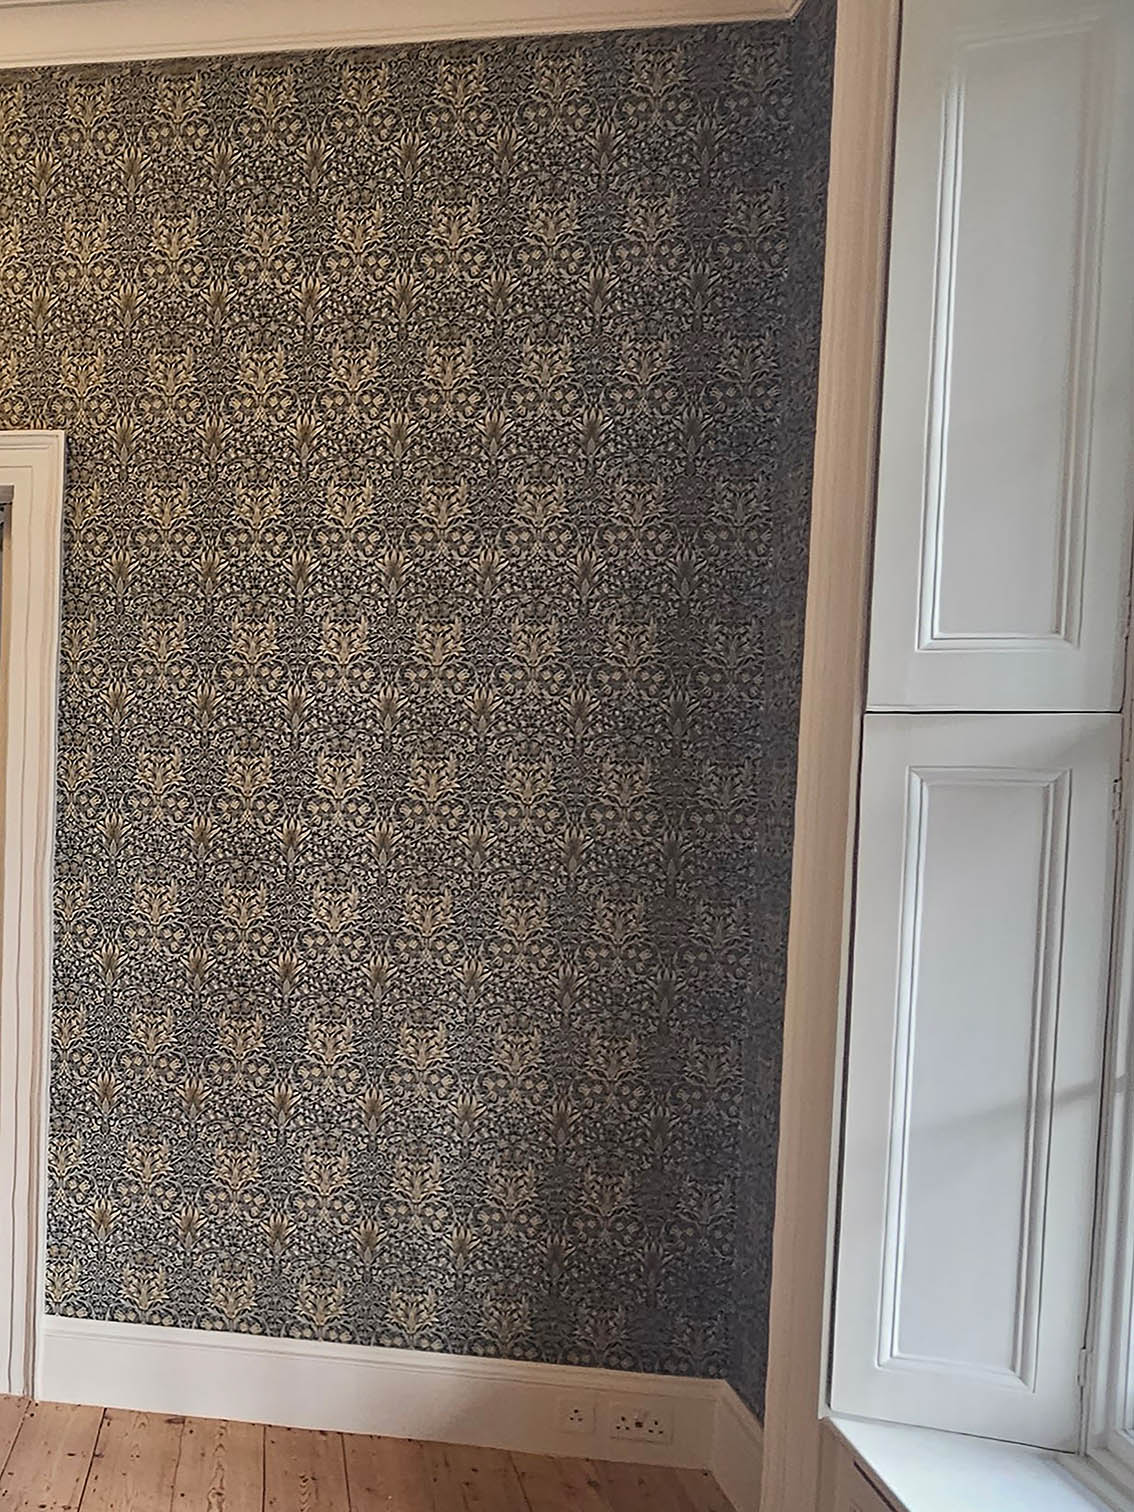 Vintage wallpaper installed by a professional wallpaper hangers.